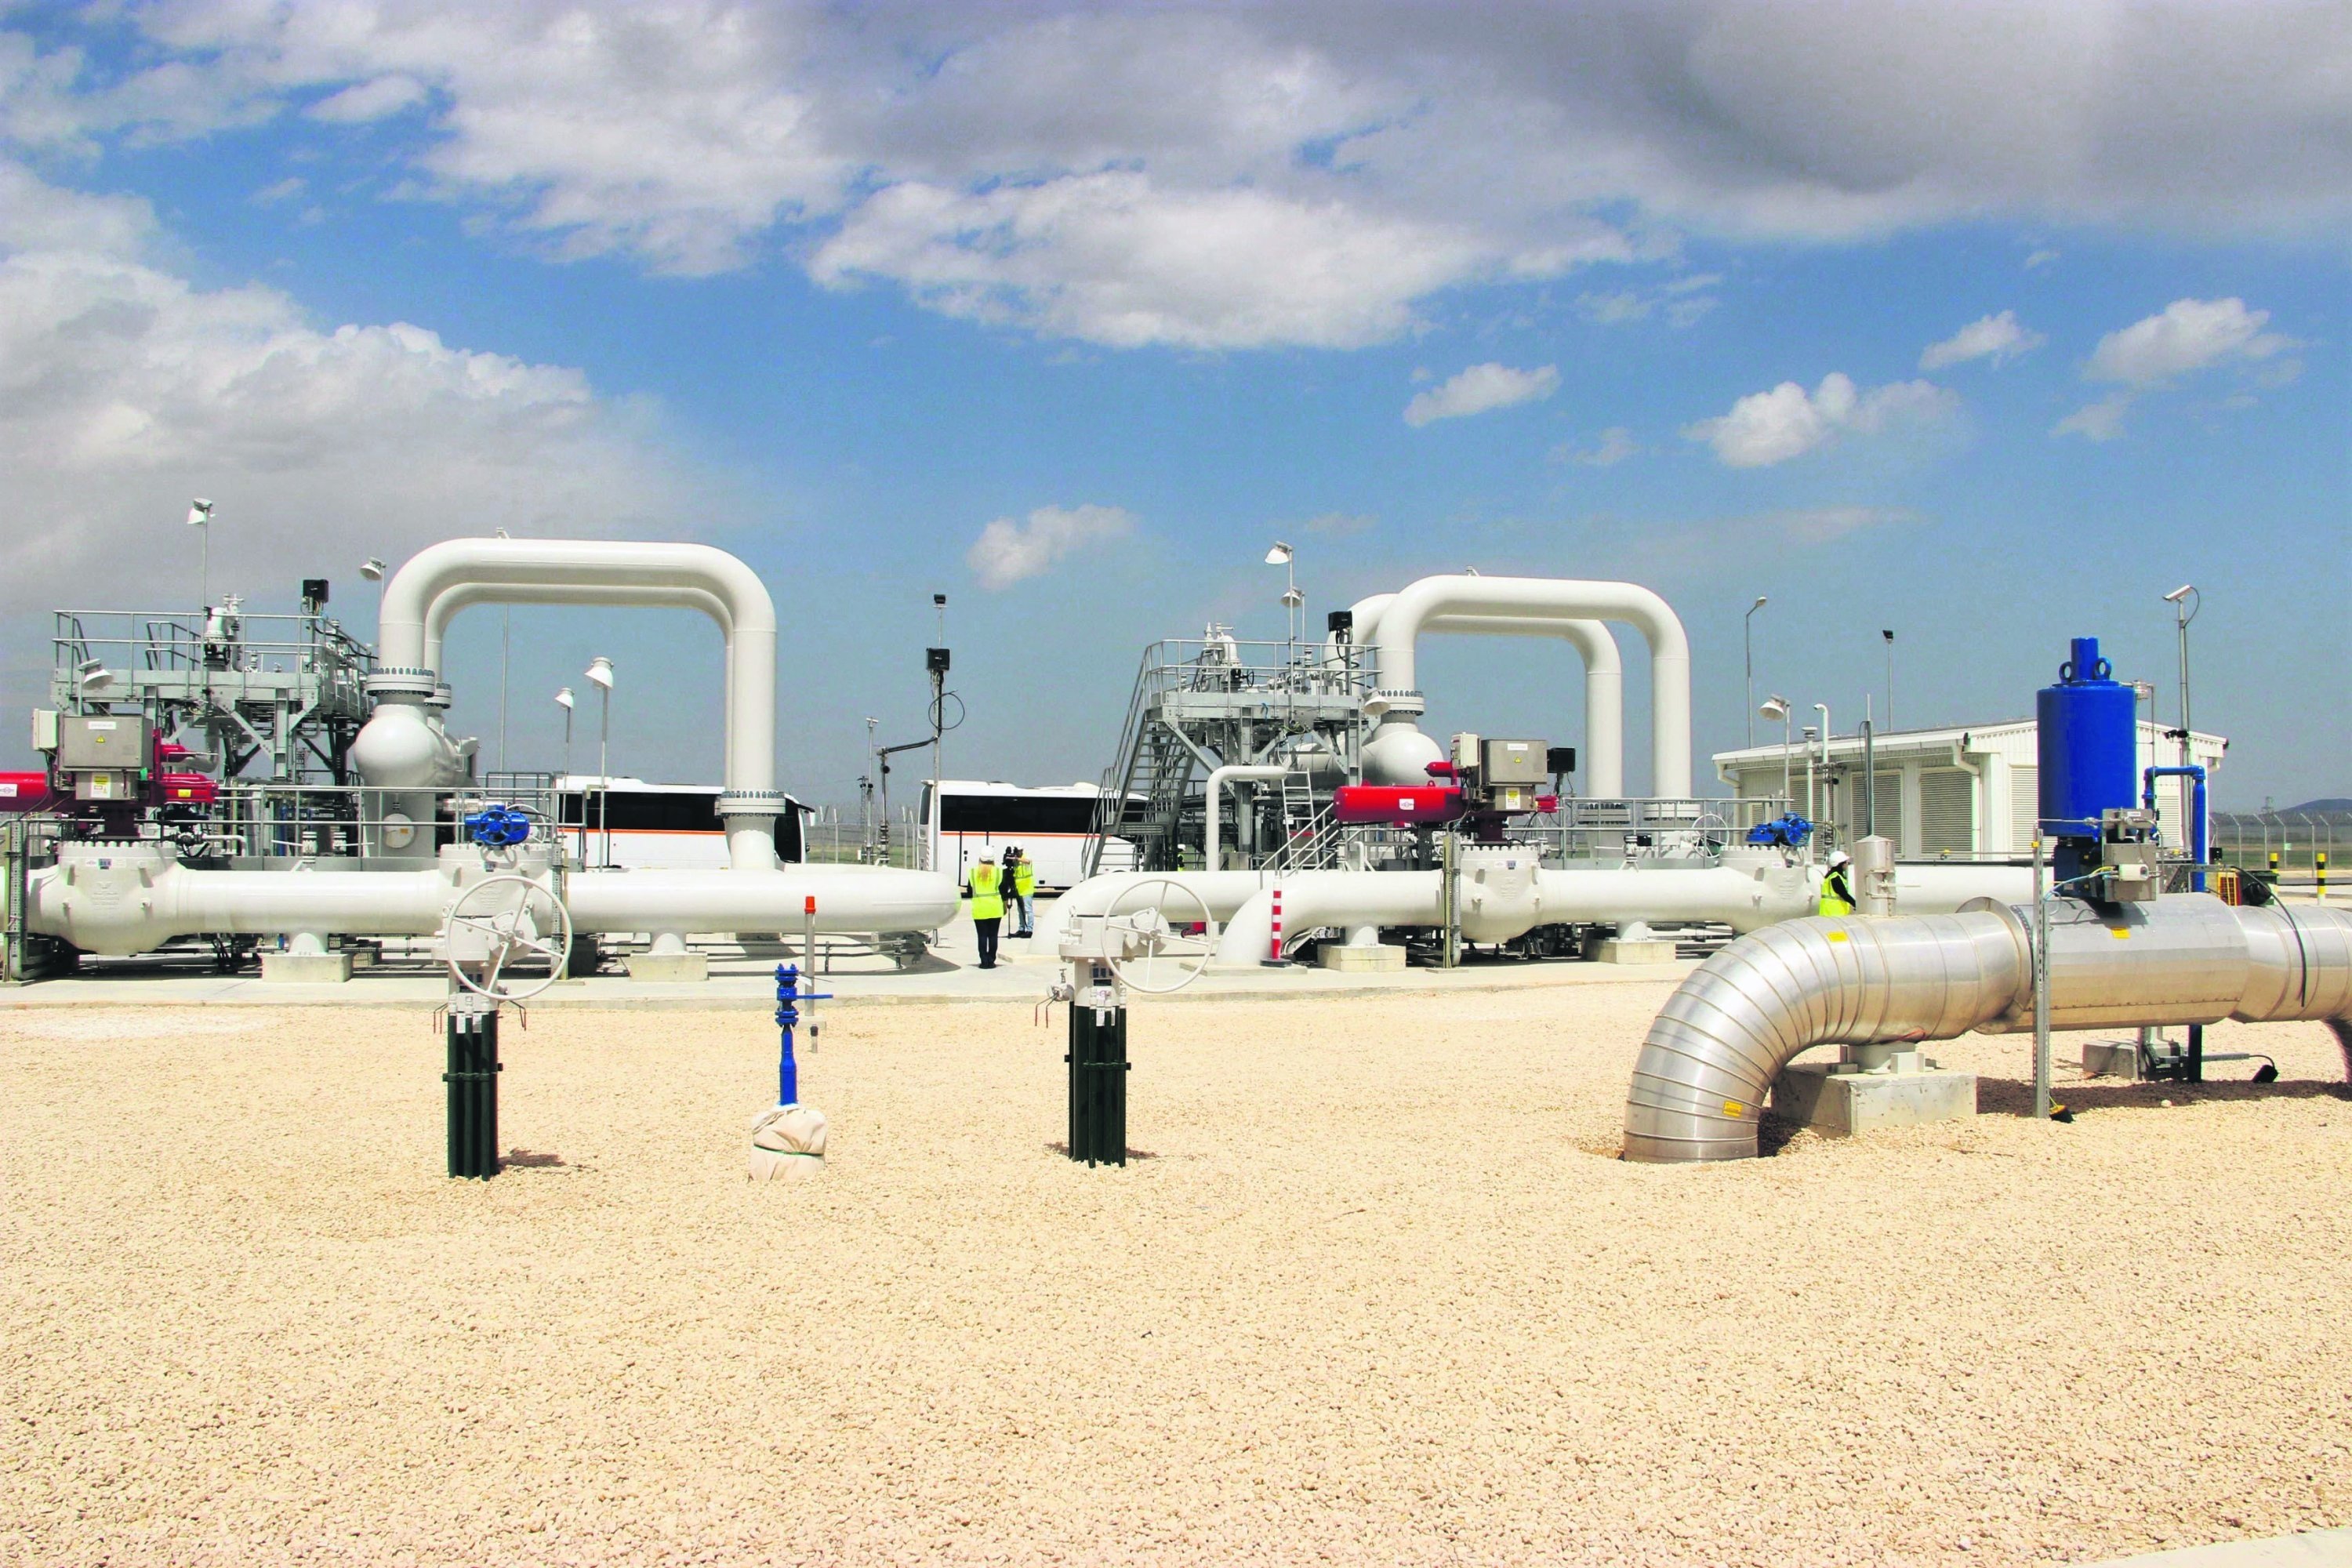 Gas valves are seen at the Eskişehir section of the Trans-Anatolian Natural Gas Pipeline (TANAP), central Türkiye, April 18, 2018. (IHA Photo).